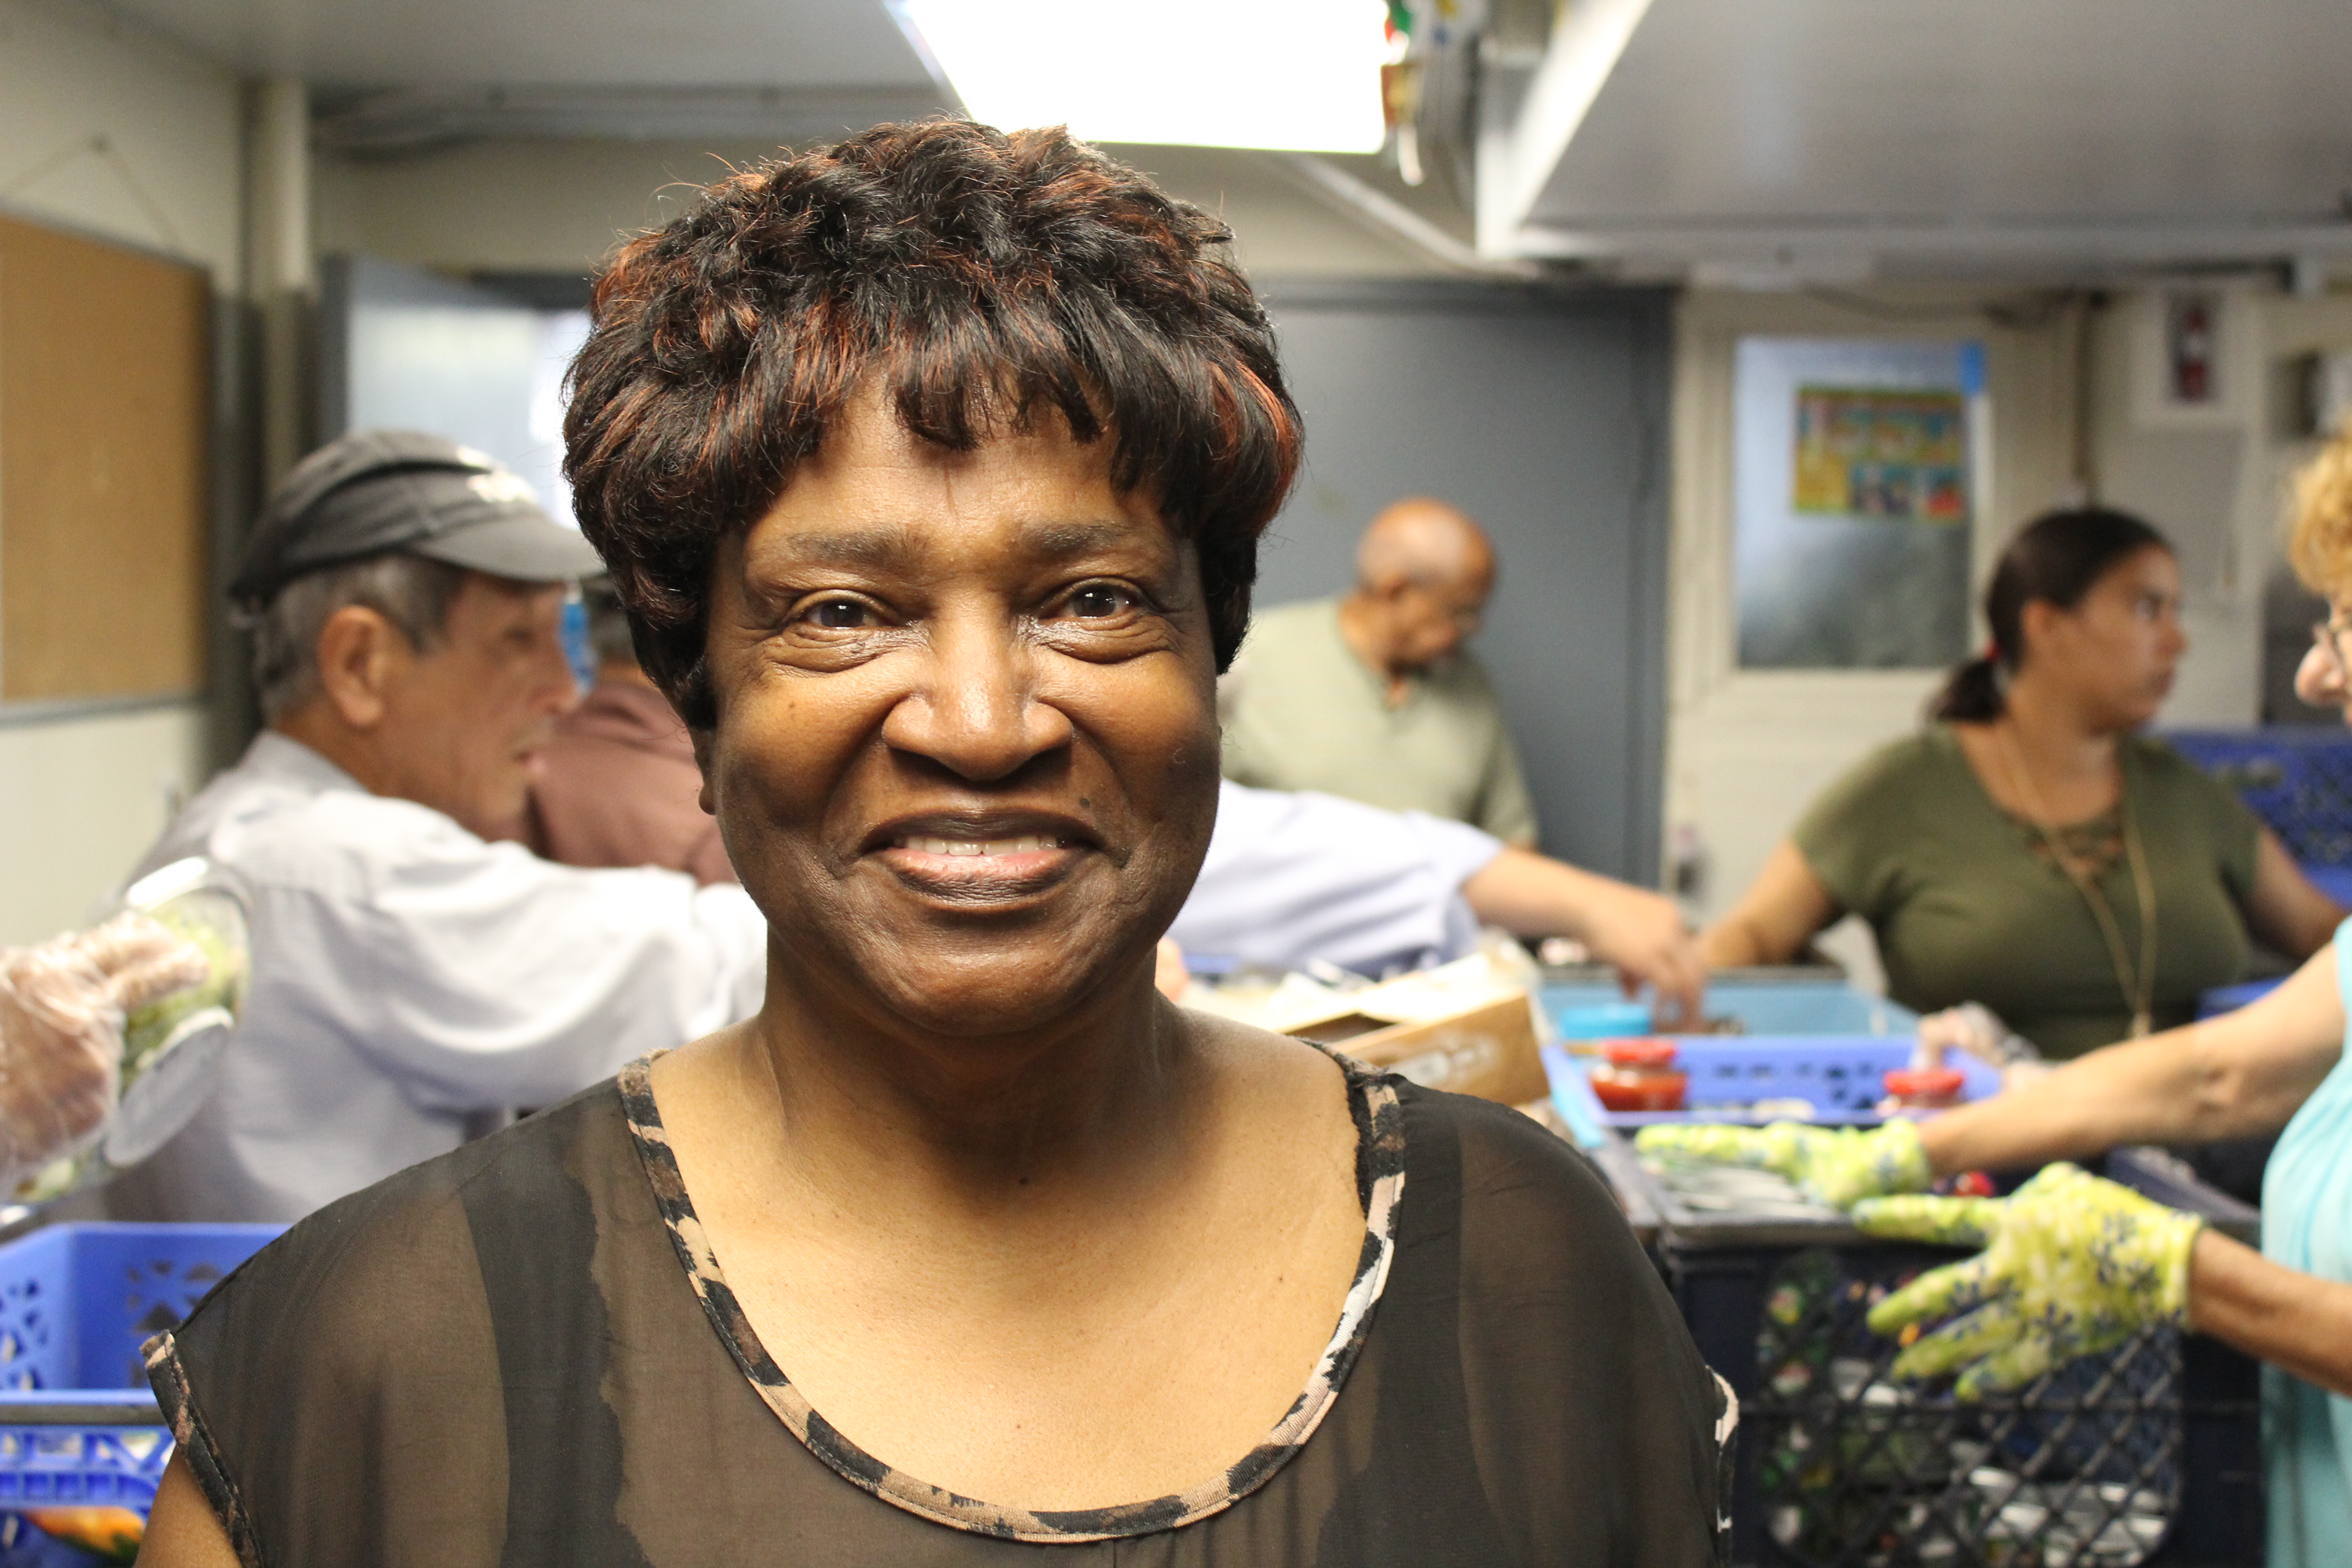 Smiling woman looks into camera during food bank distribution